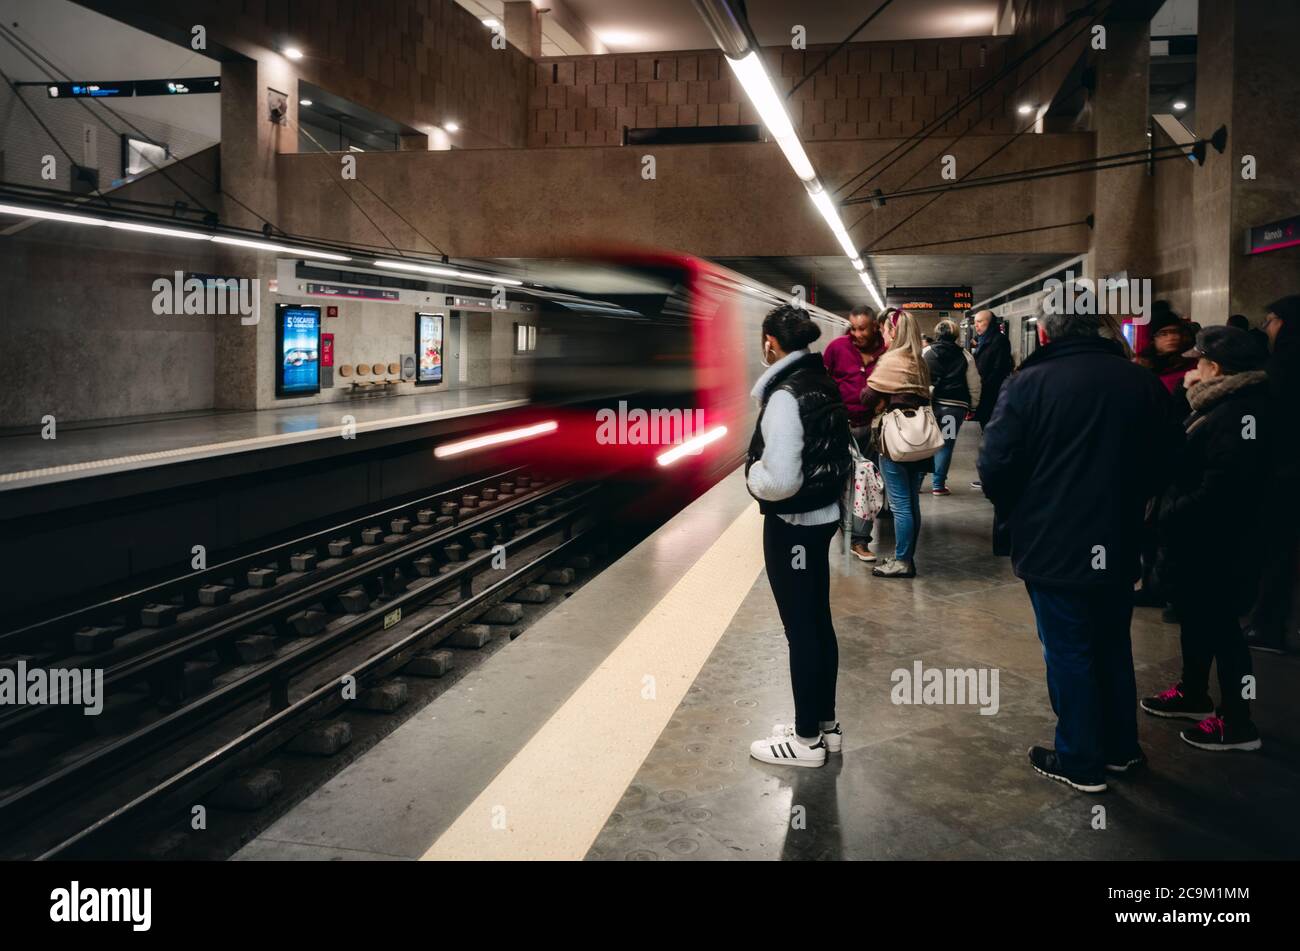 LISBON, PORTUGAL - FEBRUARY 2, 2019: People waiting on the platform of Alameda subway metro station in Lisbon, Portugal, on february 2, 2019, with a r Stock Photo